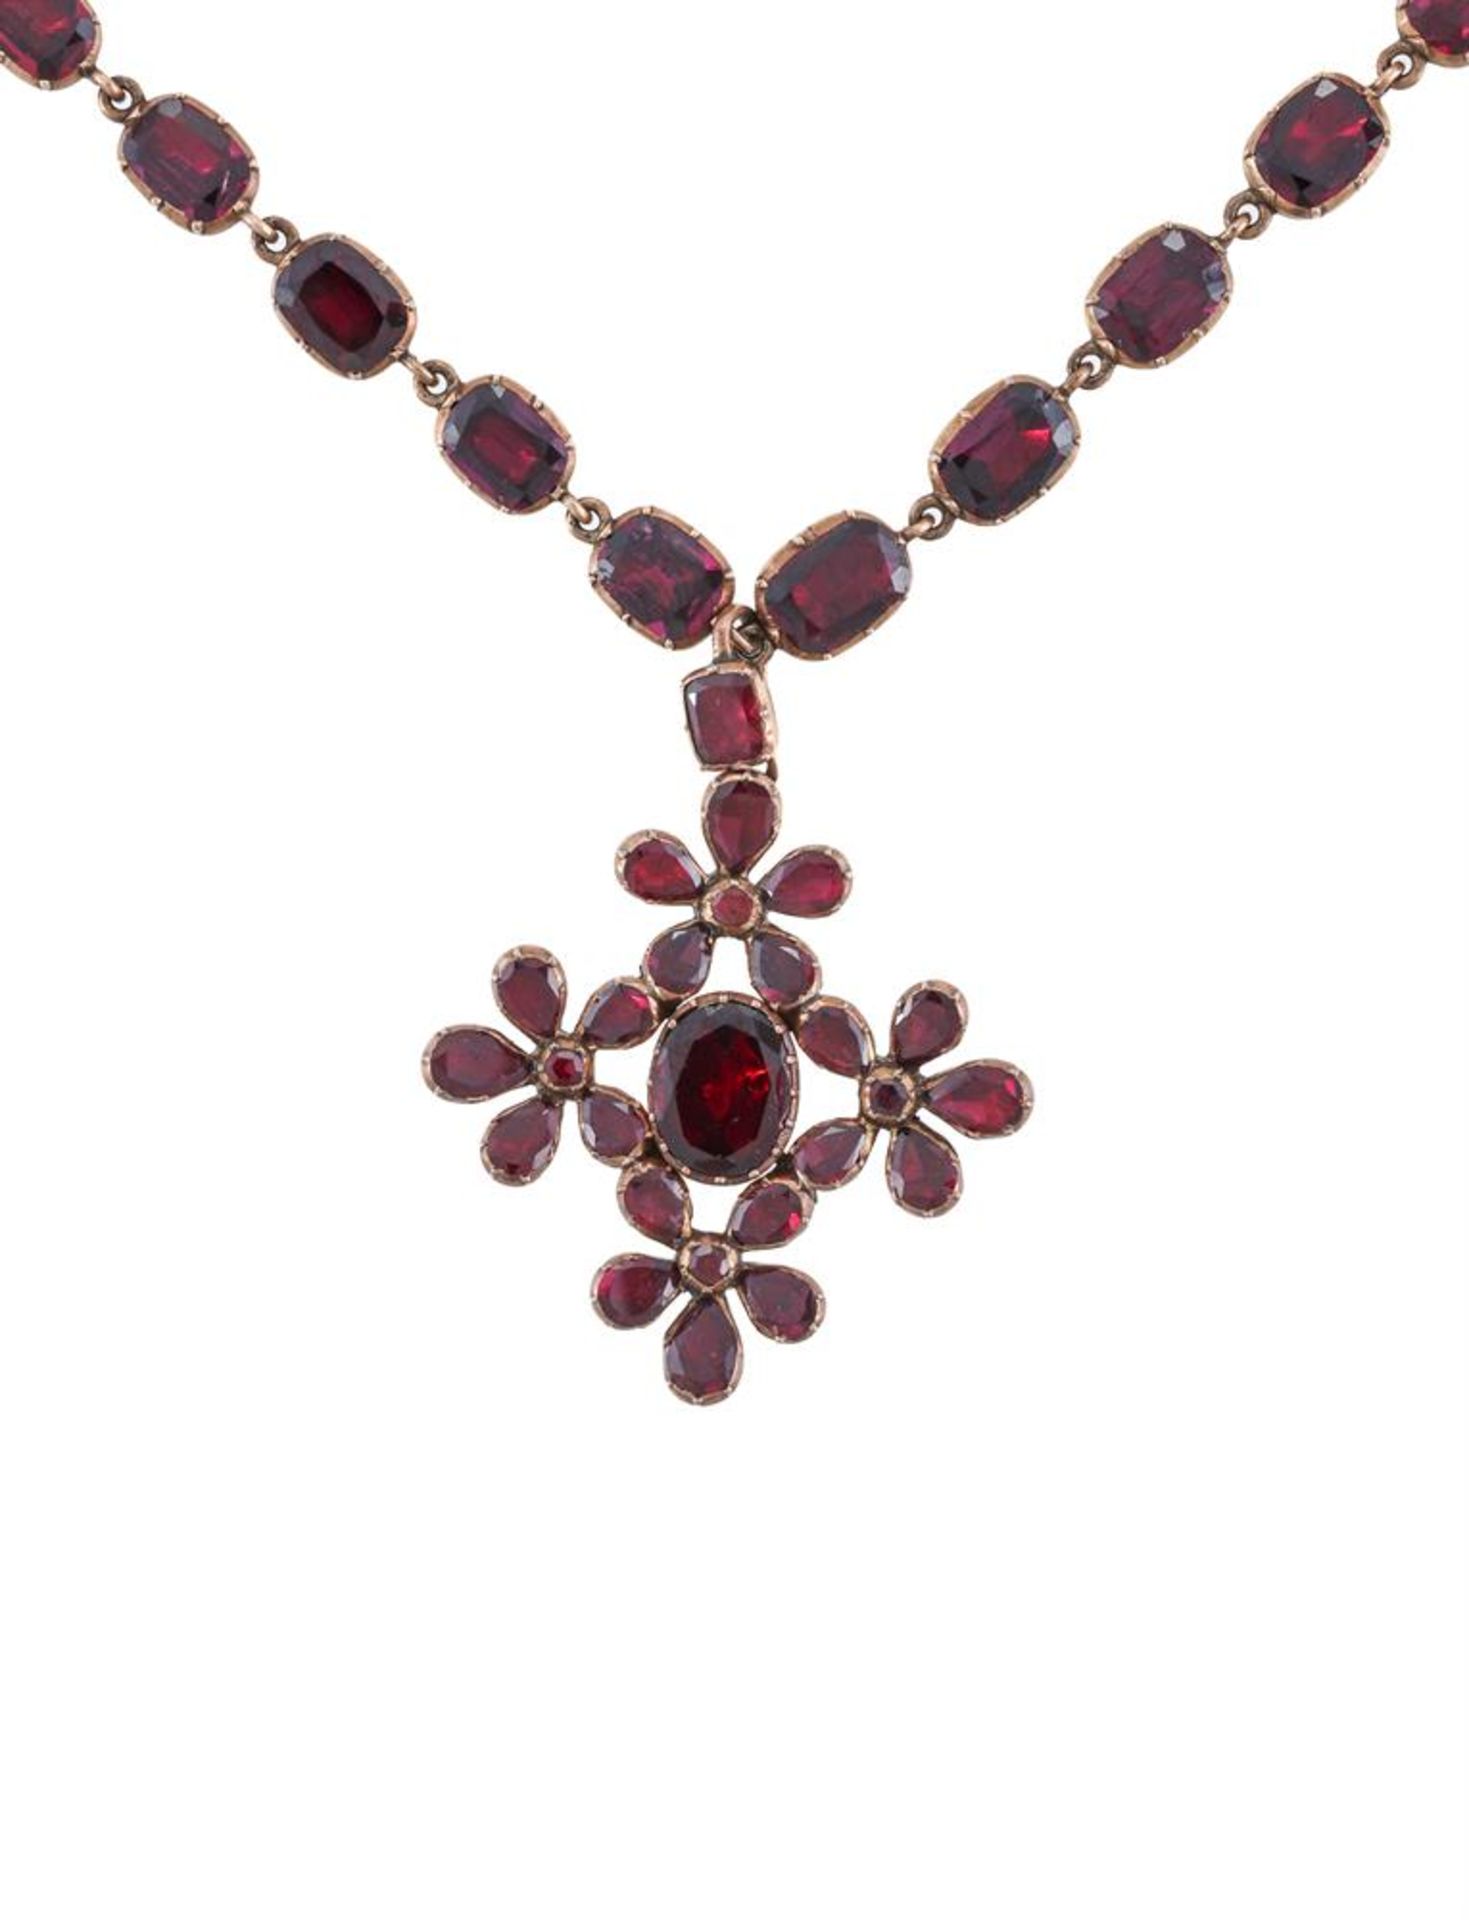 A REGENCY GARNET AND GOLD RIVIERE NECKLACE WITH DROP PENDANT, CIRCA 1820 - Image 2 of 4